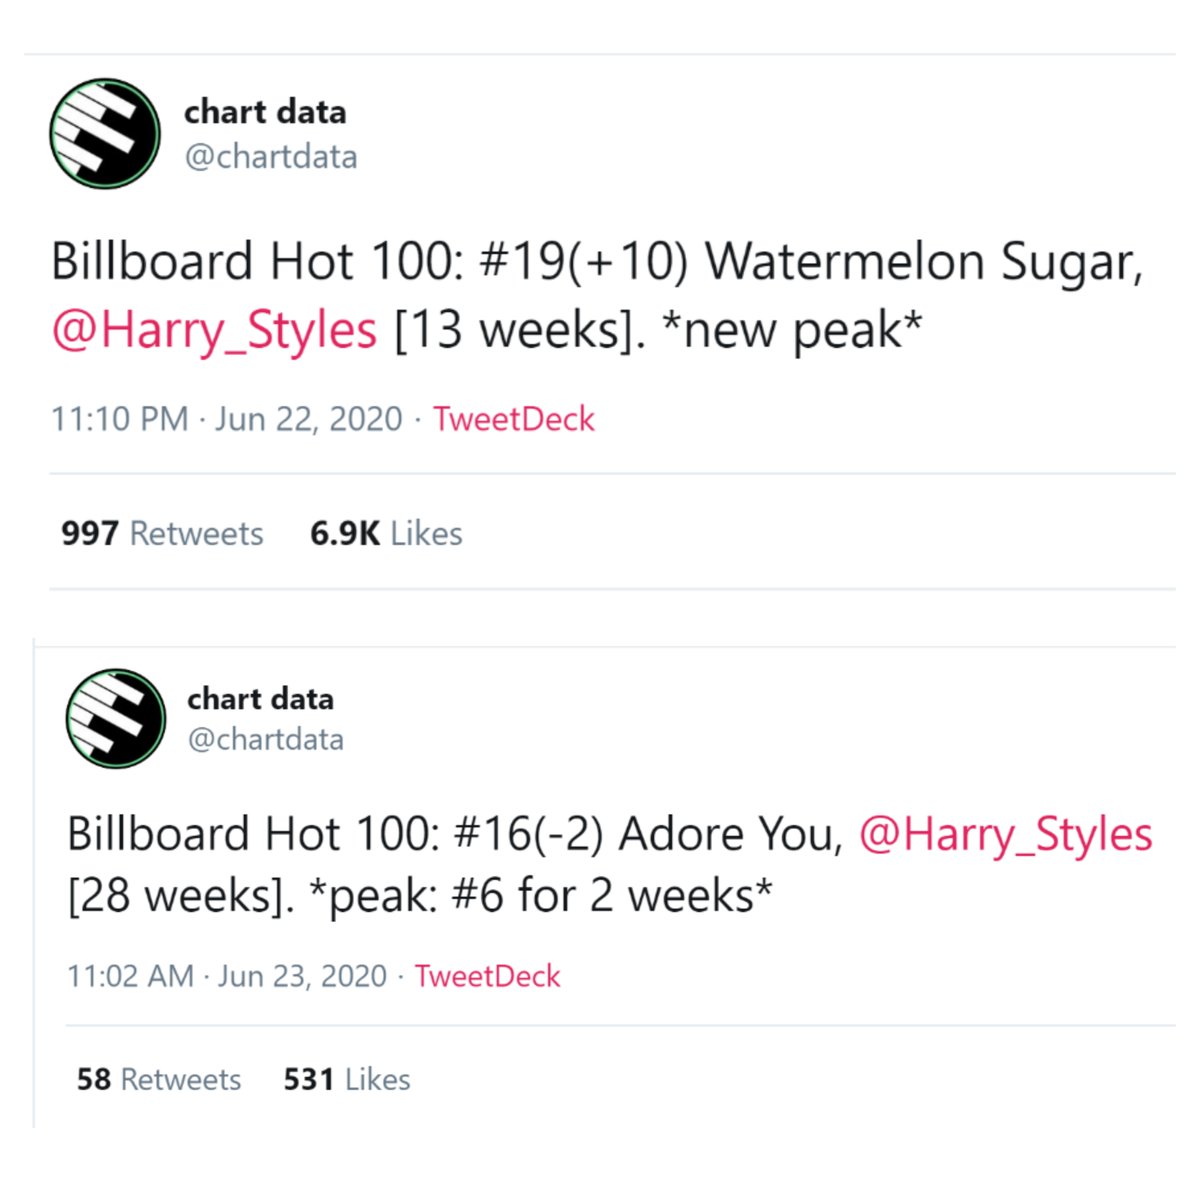 -"Fine Line" has spent half a year in the top 20 on billboard 200 (since it debuted at #1 on december 20th 2019).- Harry has 2 songs in the top 20 on Billboard 100 chart this week, and now has 4 singles that reached top 20 on that chart.